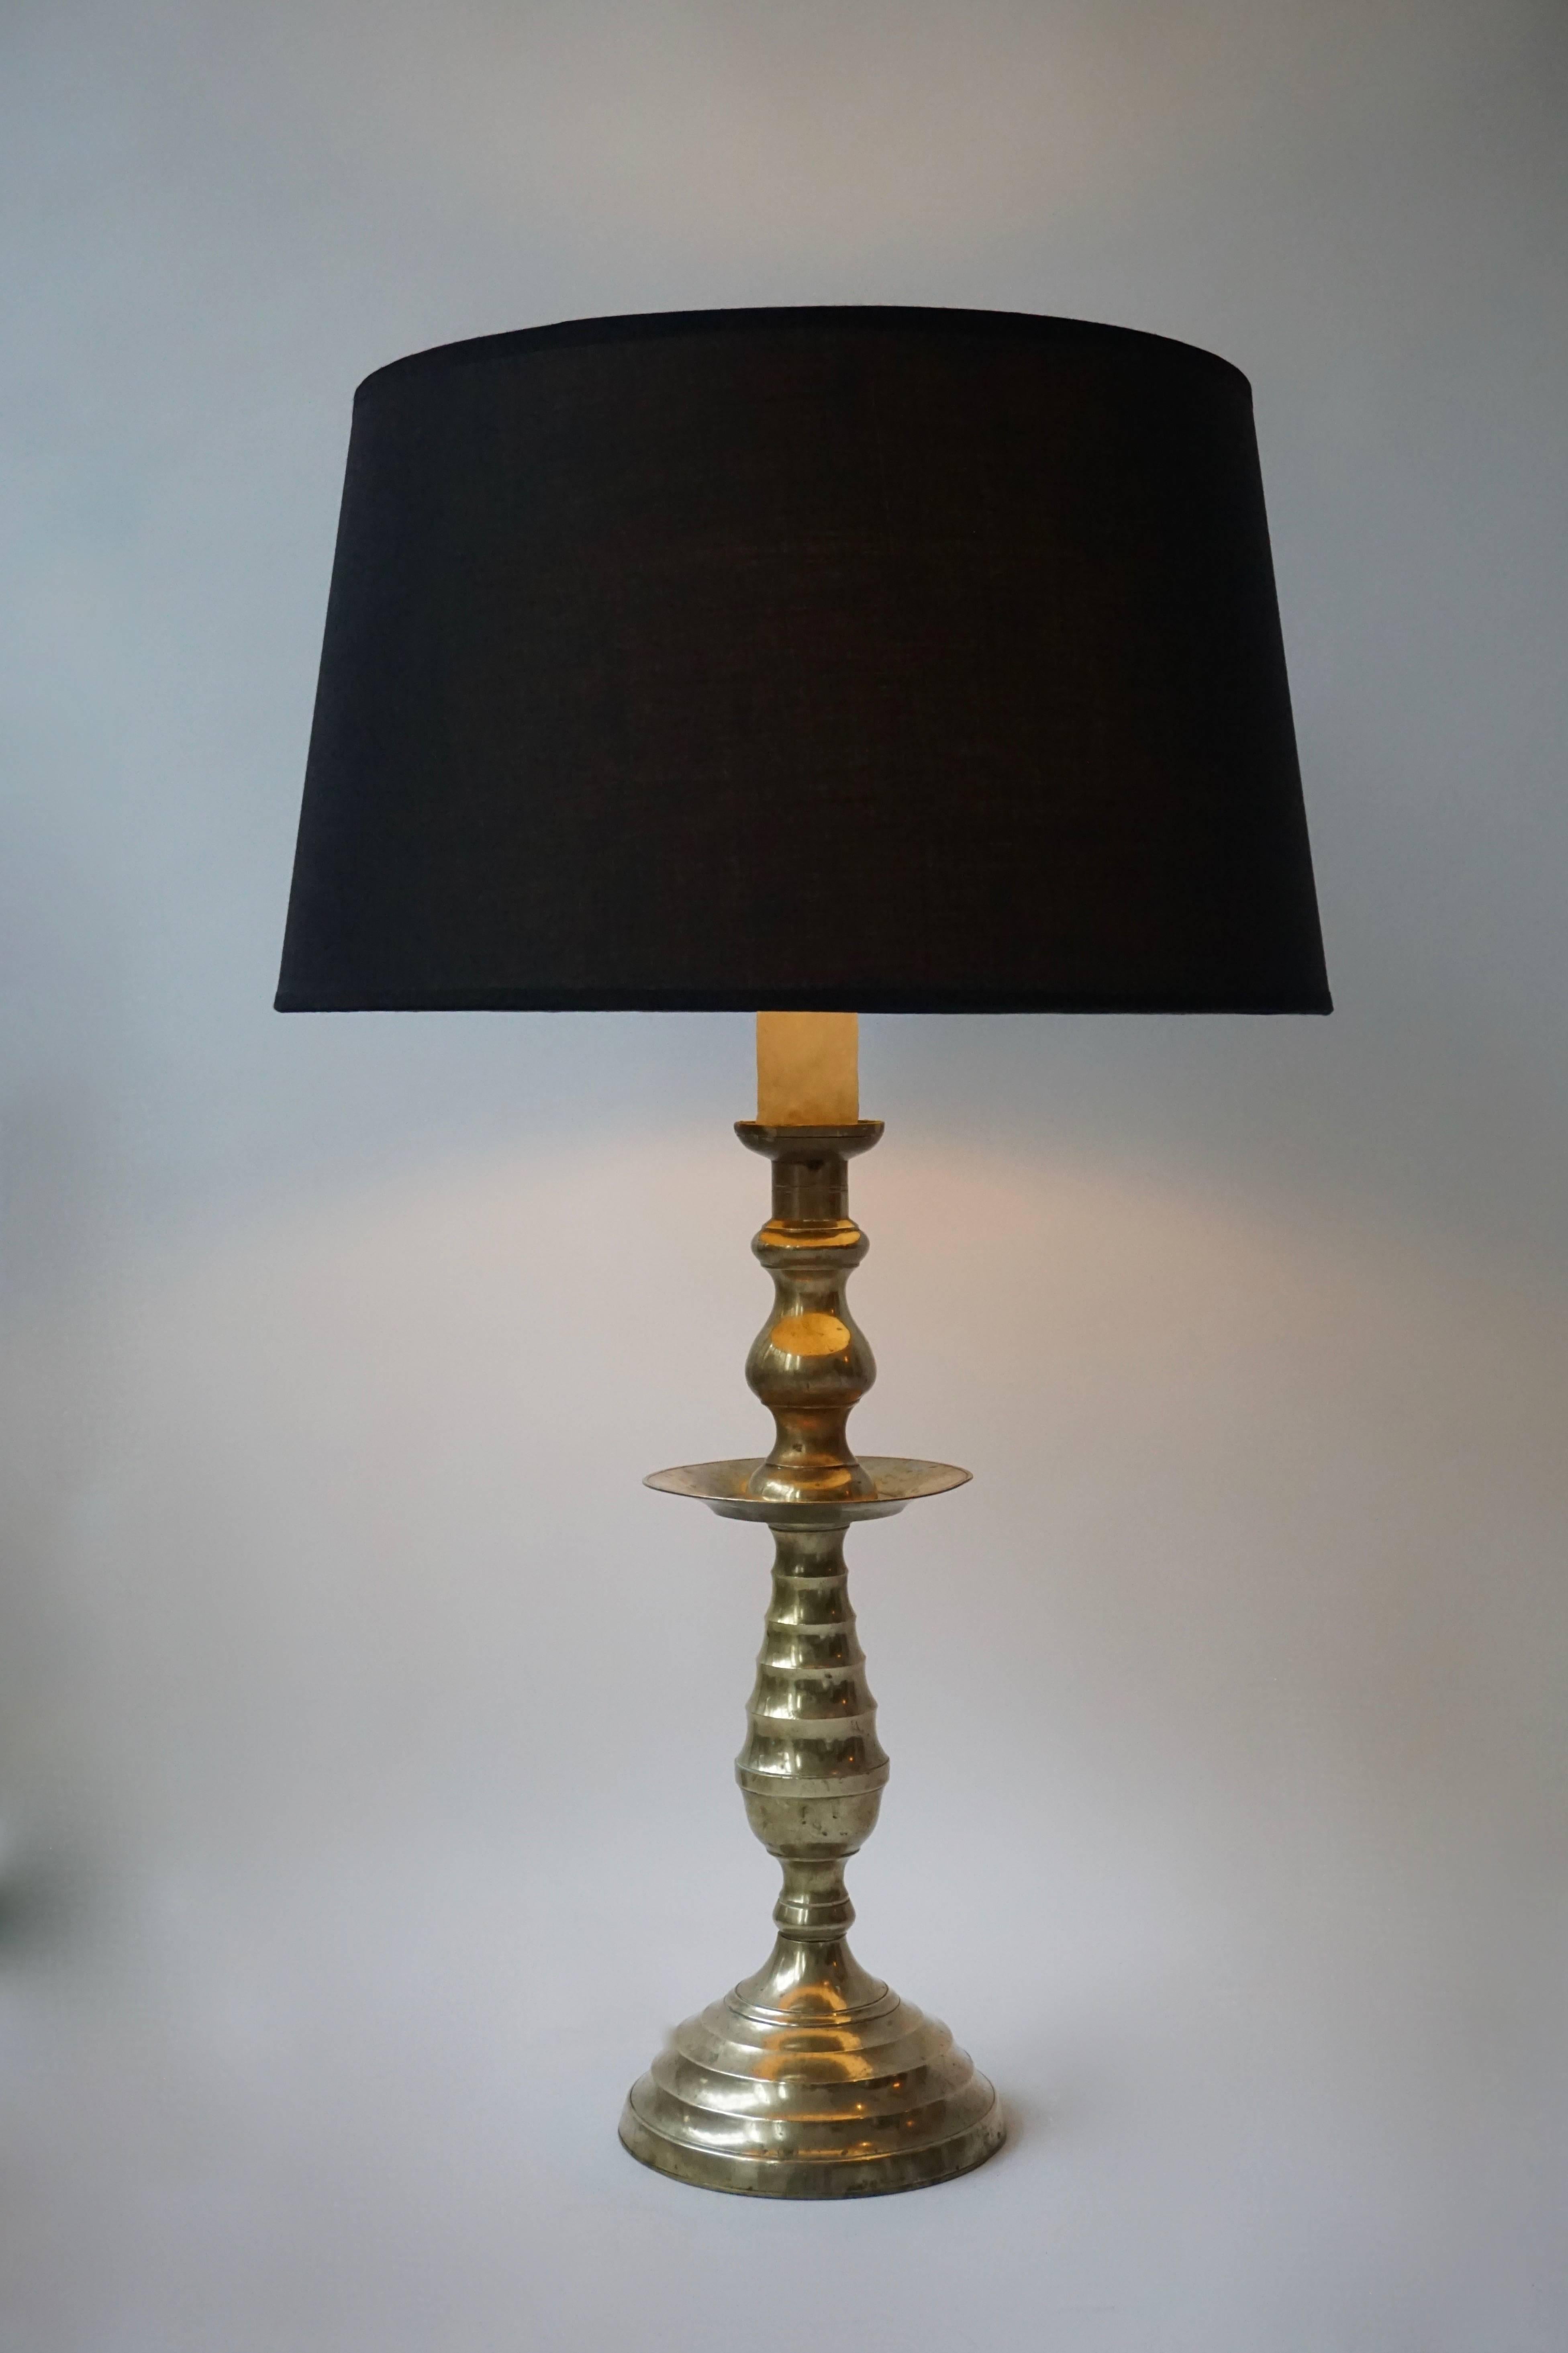 Two brass table lights.
Height with shade 60 cm.
Diameter shade 48 cm.
height shade 27 cm.
Diameter base 18 cm.
Shades are not included in the price.